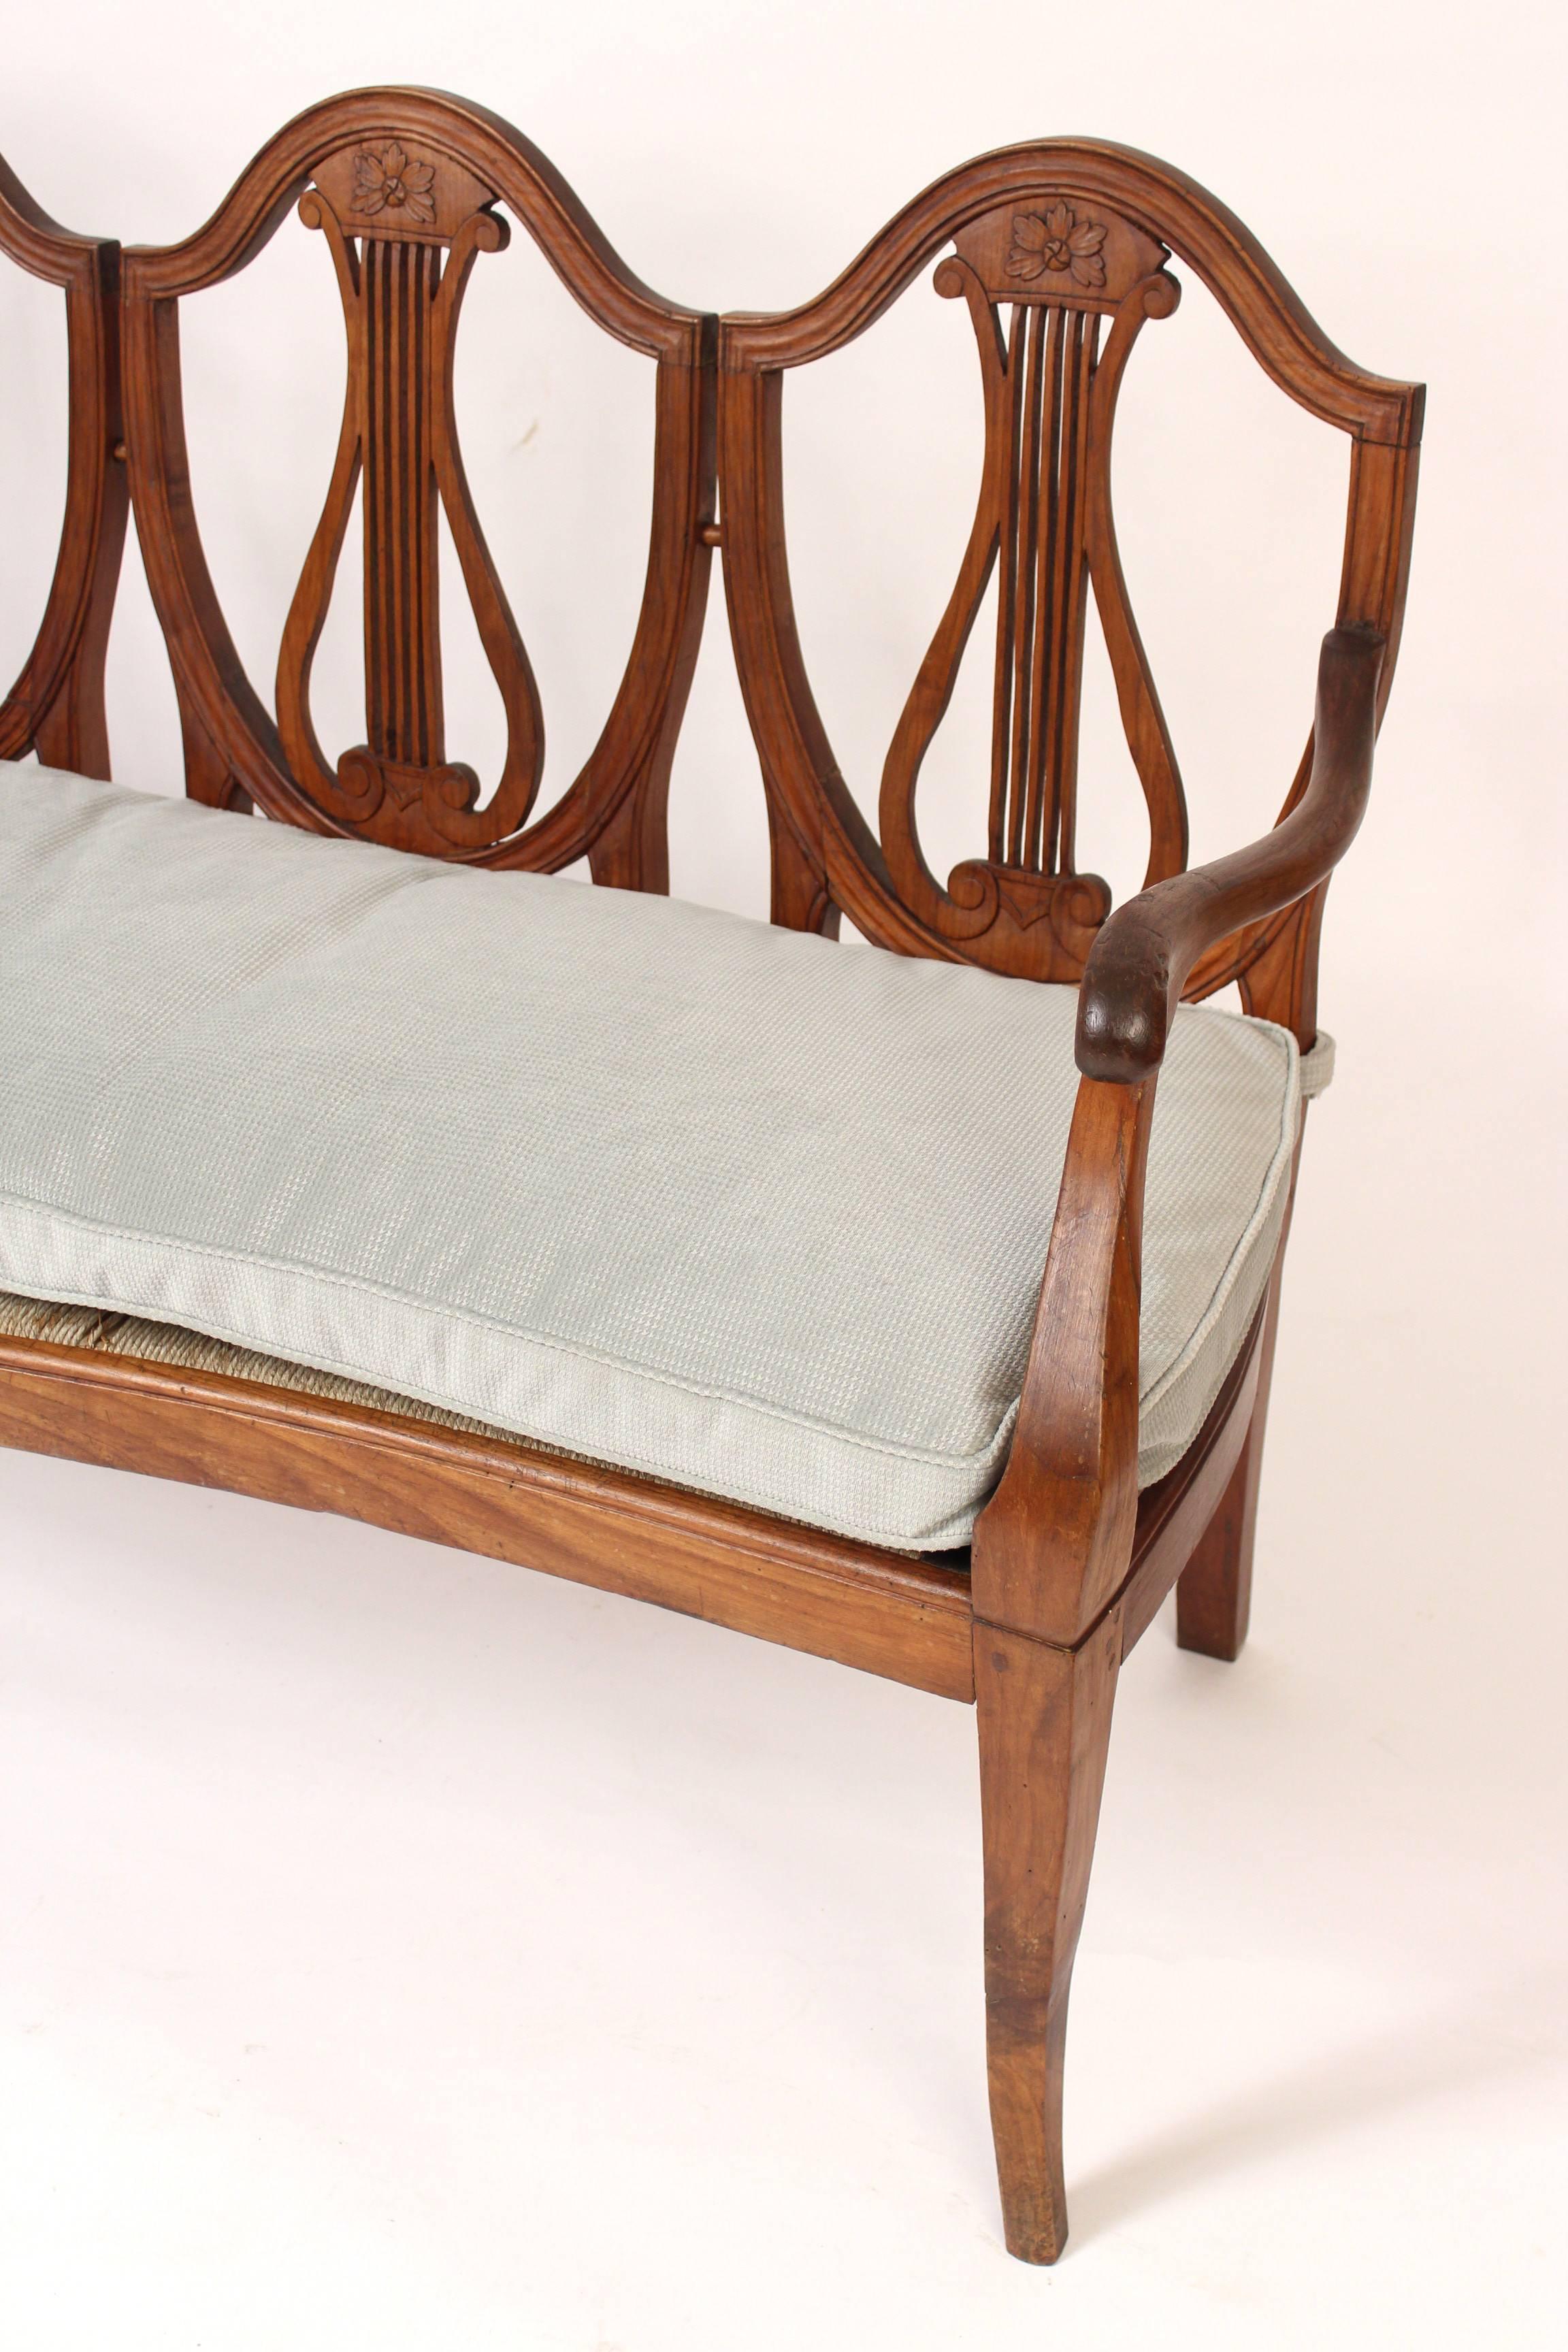 19th Century Continental Neoclassical Fruit Wood Settee